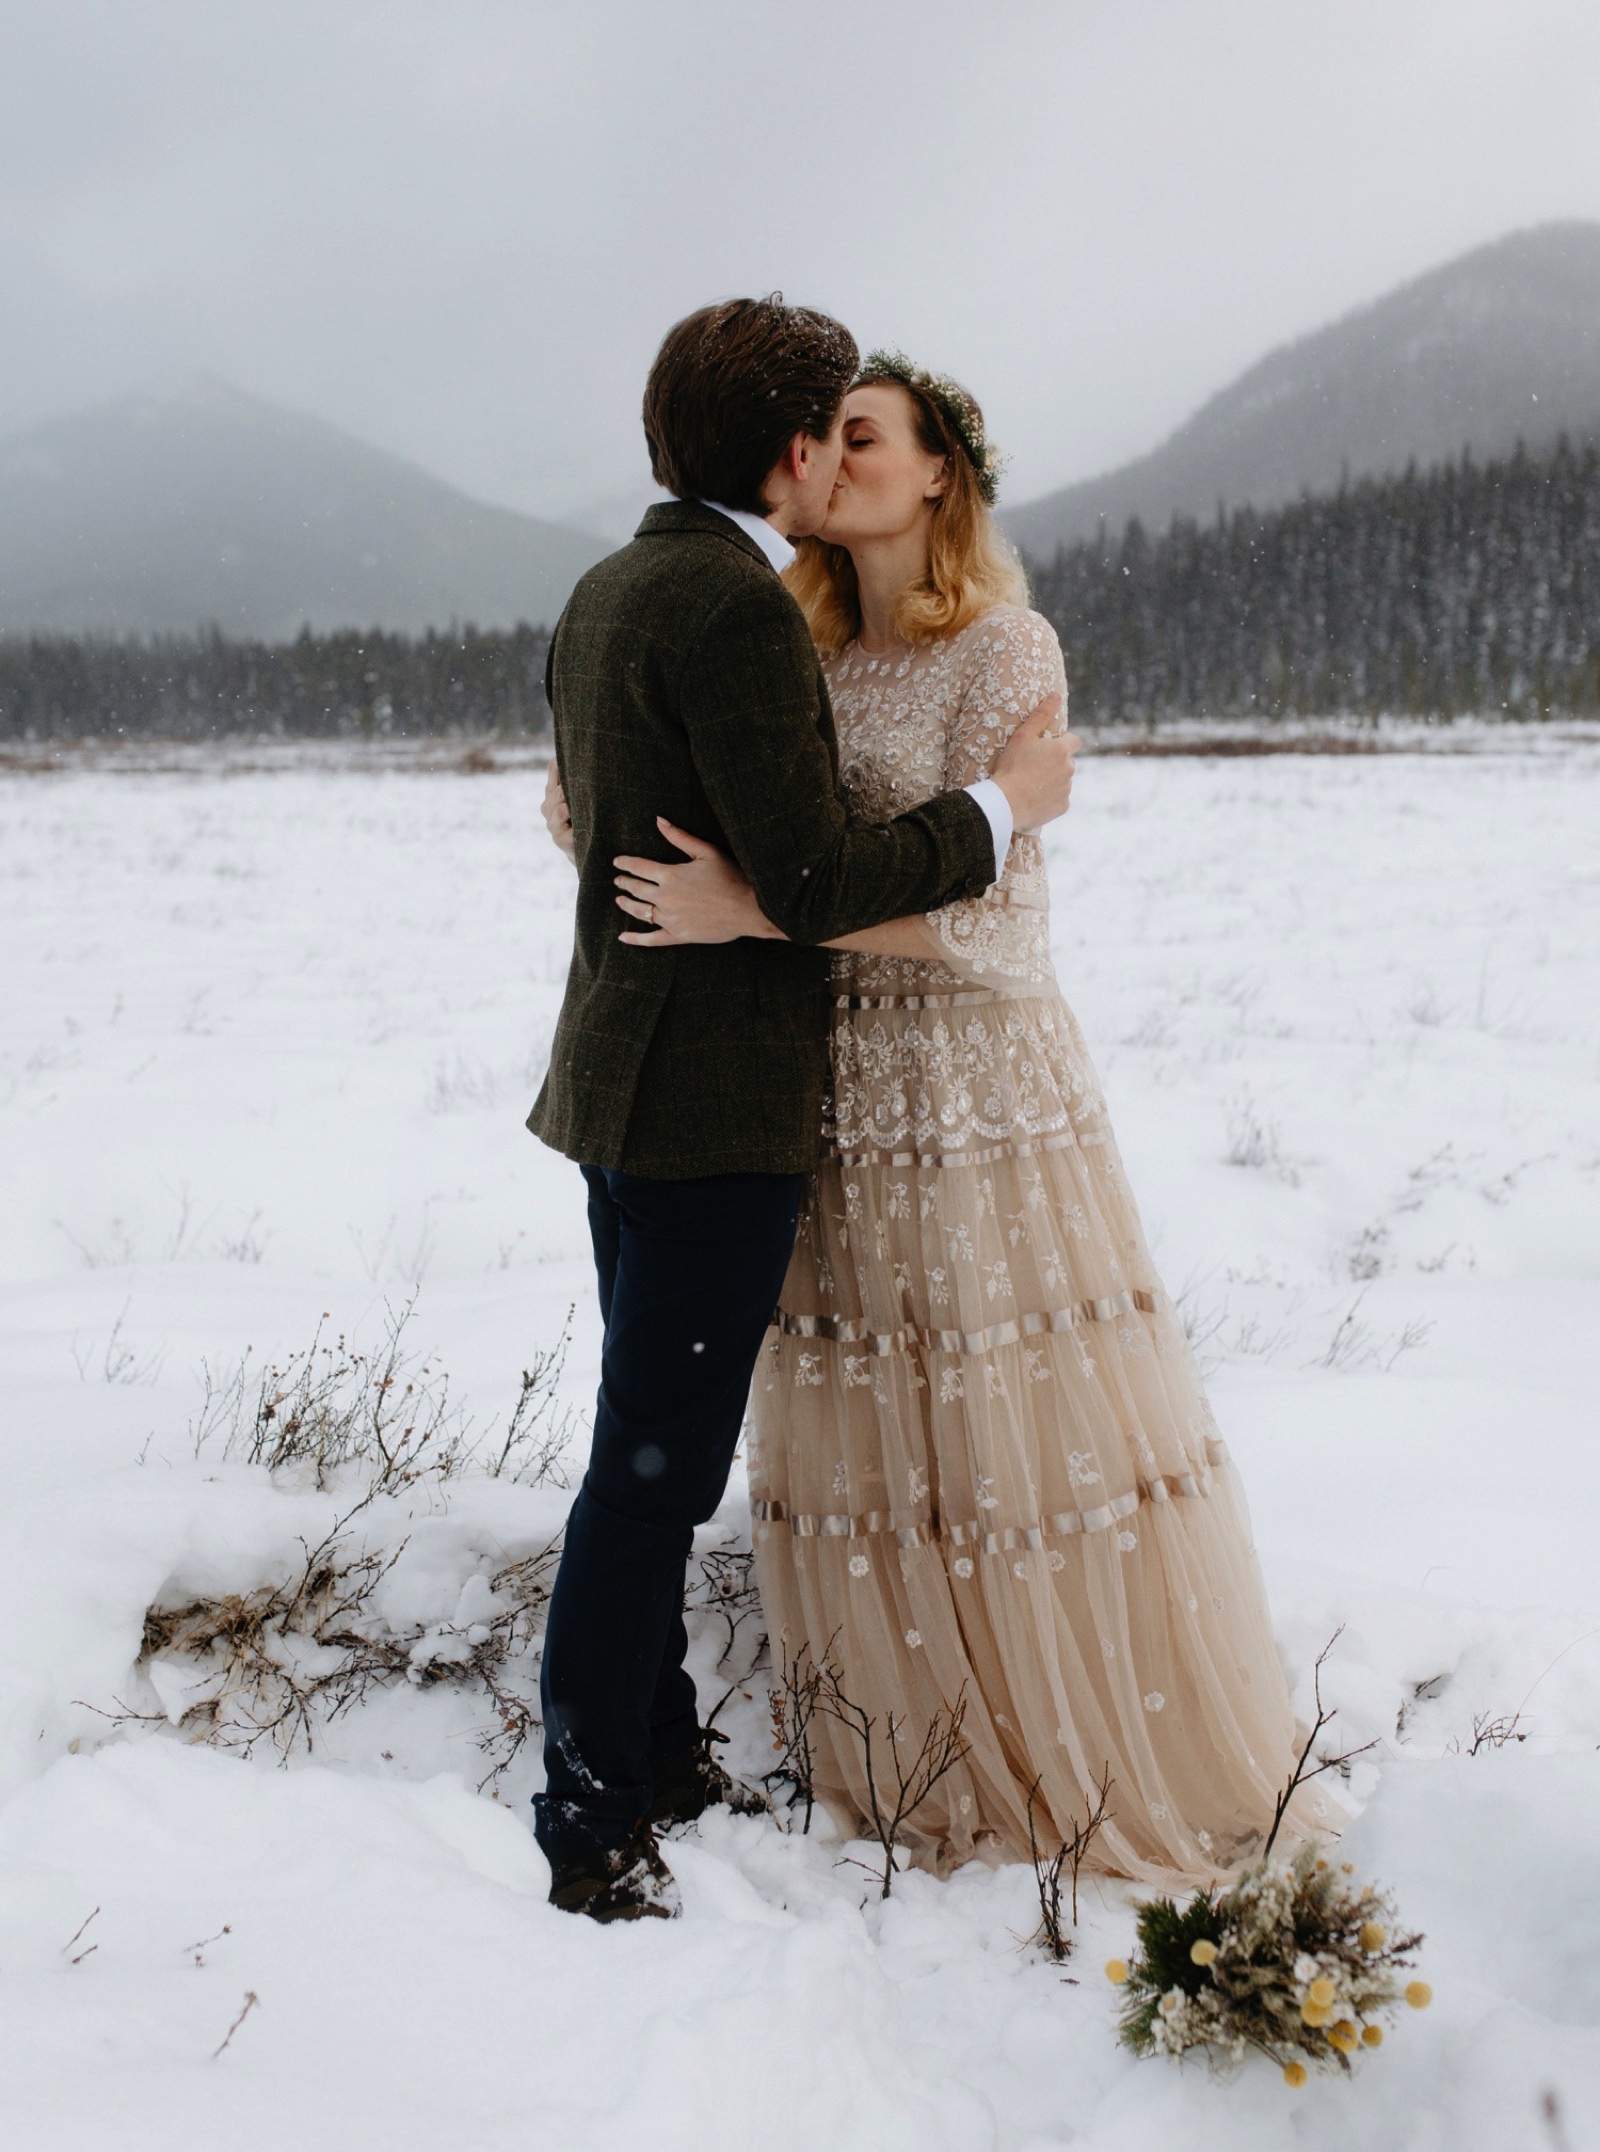 Couple's first kiss at their winter elopement in Alberta's provincial park